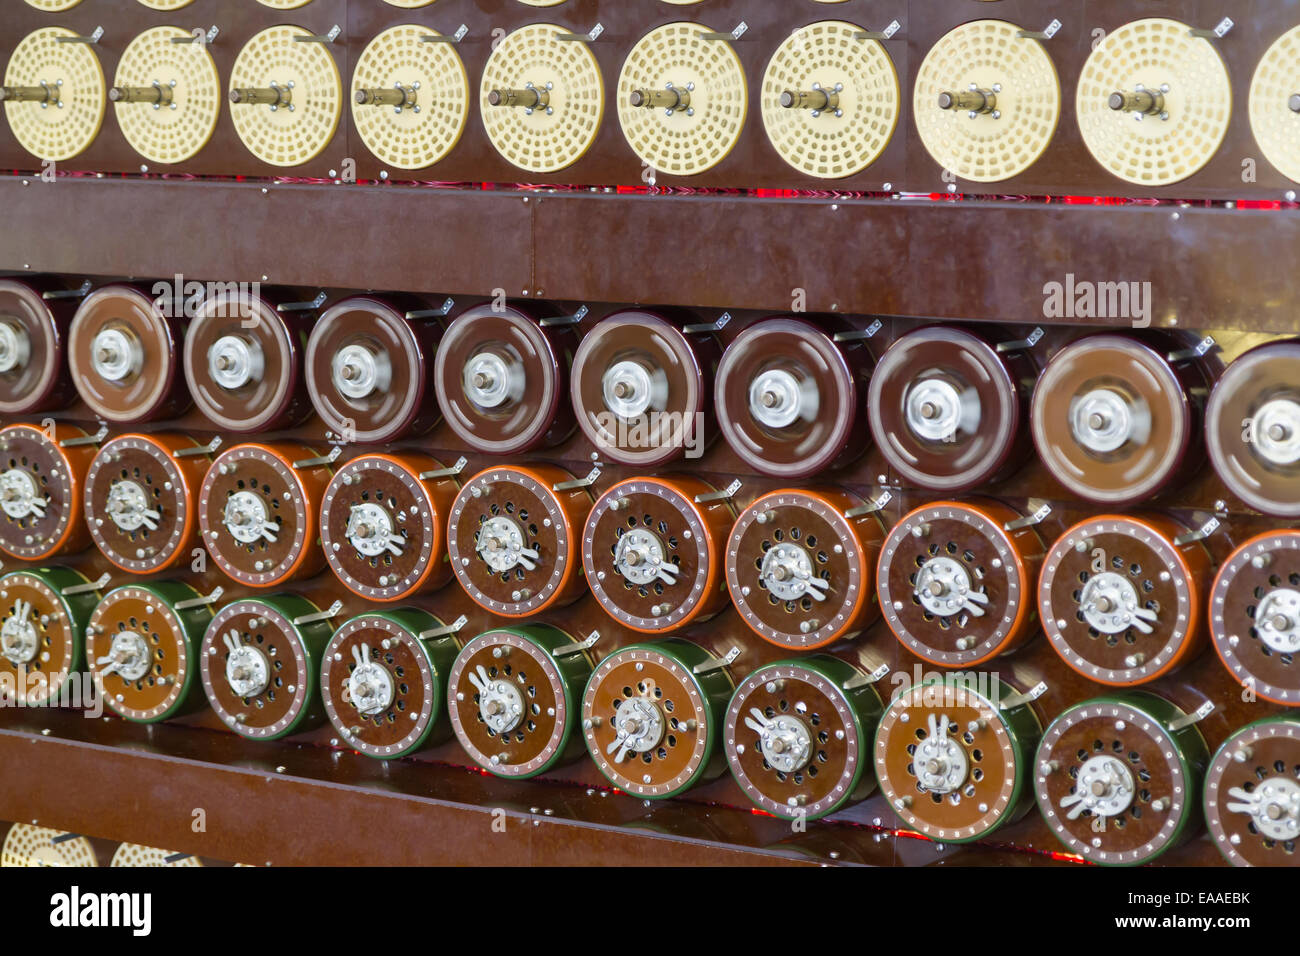 Rebuilt Turing Bombe in action at Bletchley Park, showing rotation of upper row of drums and middle row of drums Stock Photo